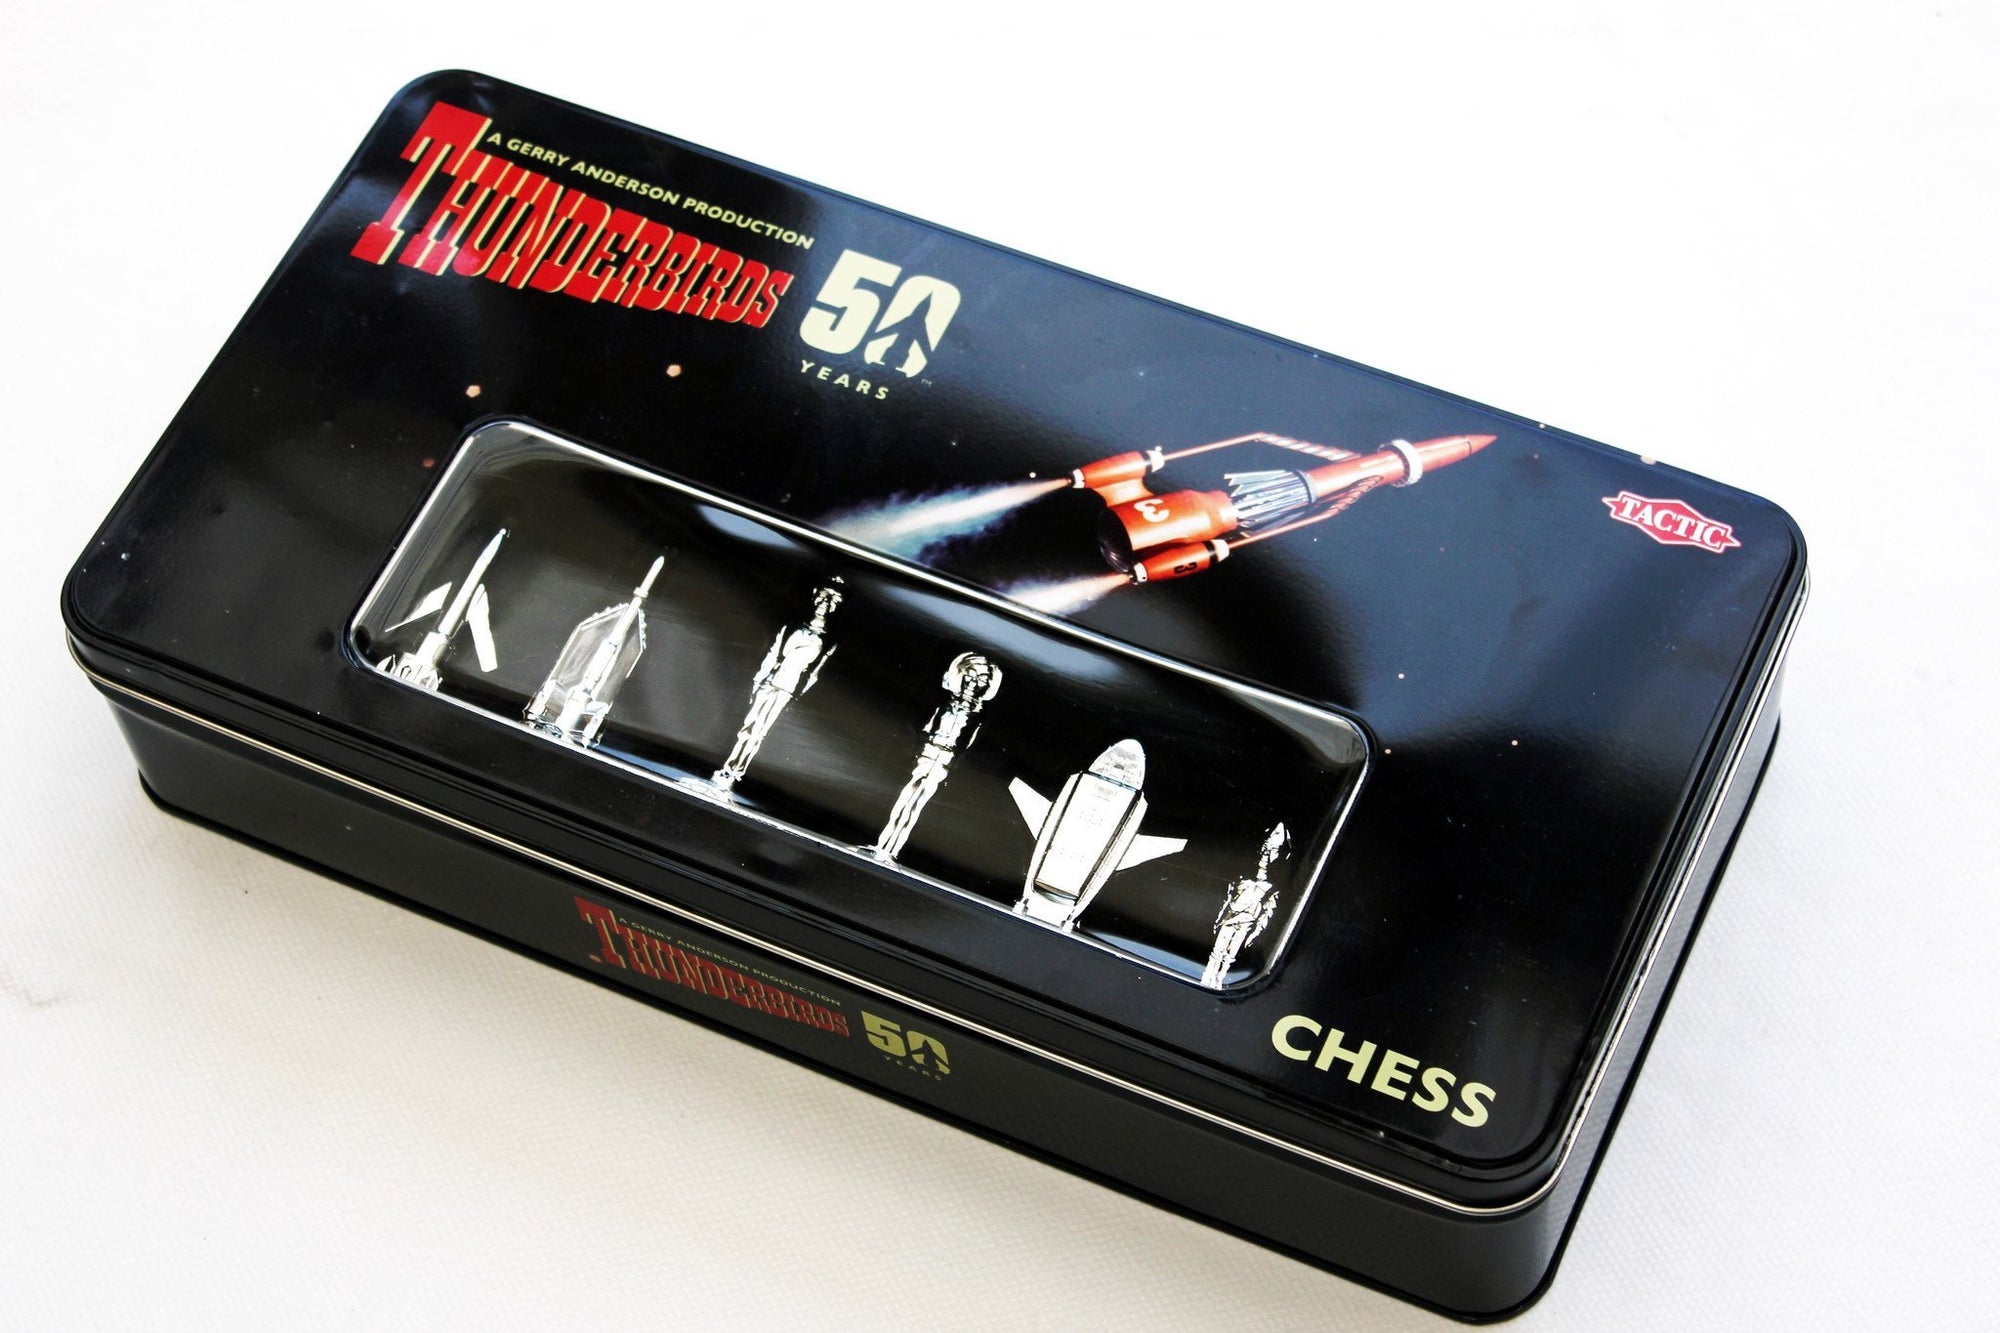 Settle the Score with the Thunderbirds Chess Set! - The Gerry Anderson Store